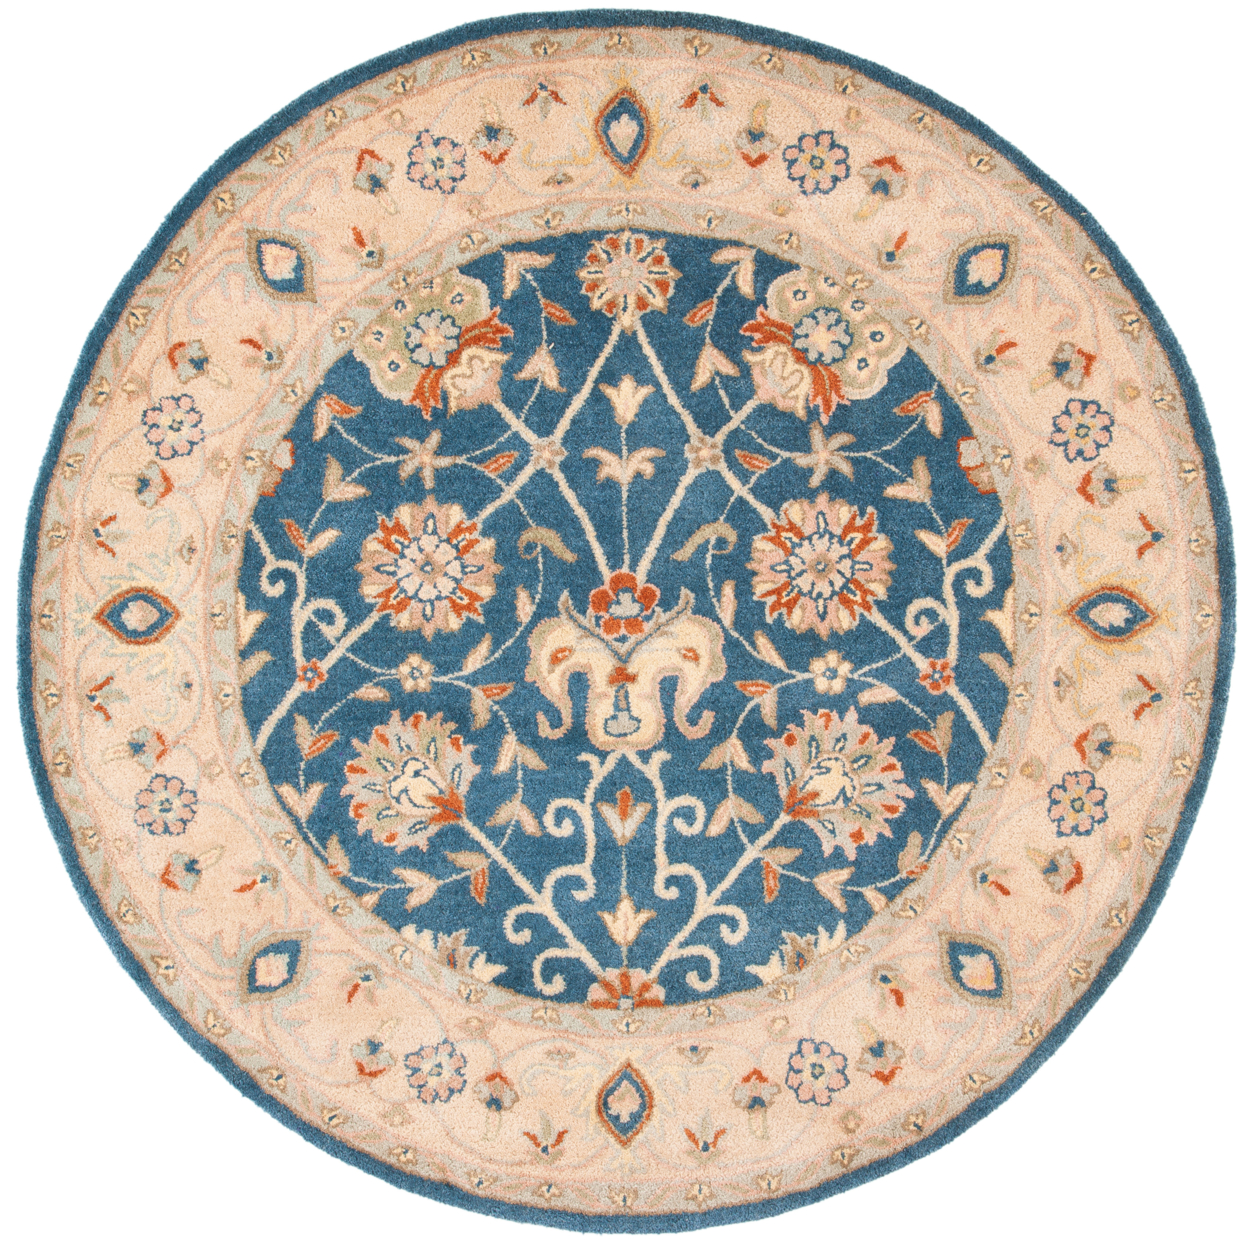 SAFAVIEH Antiquity Collection AT21E Handmade Blue Rug - 8' Round